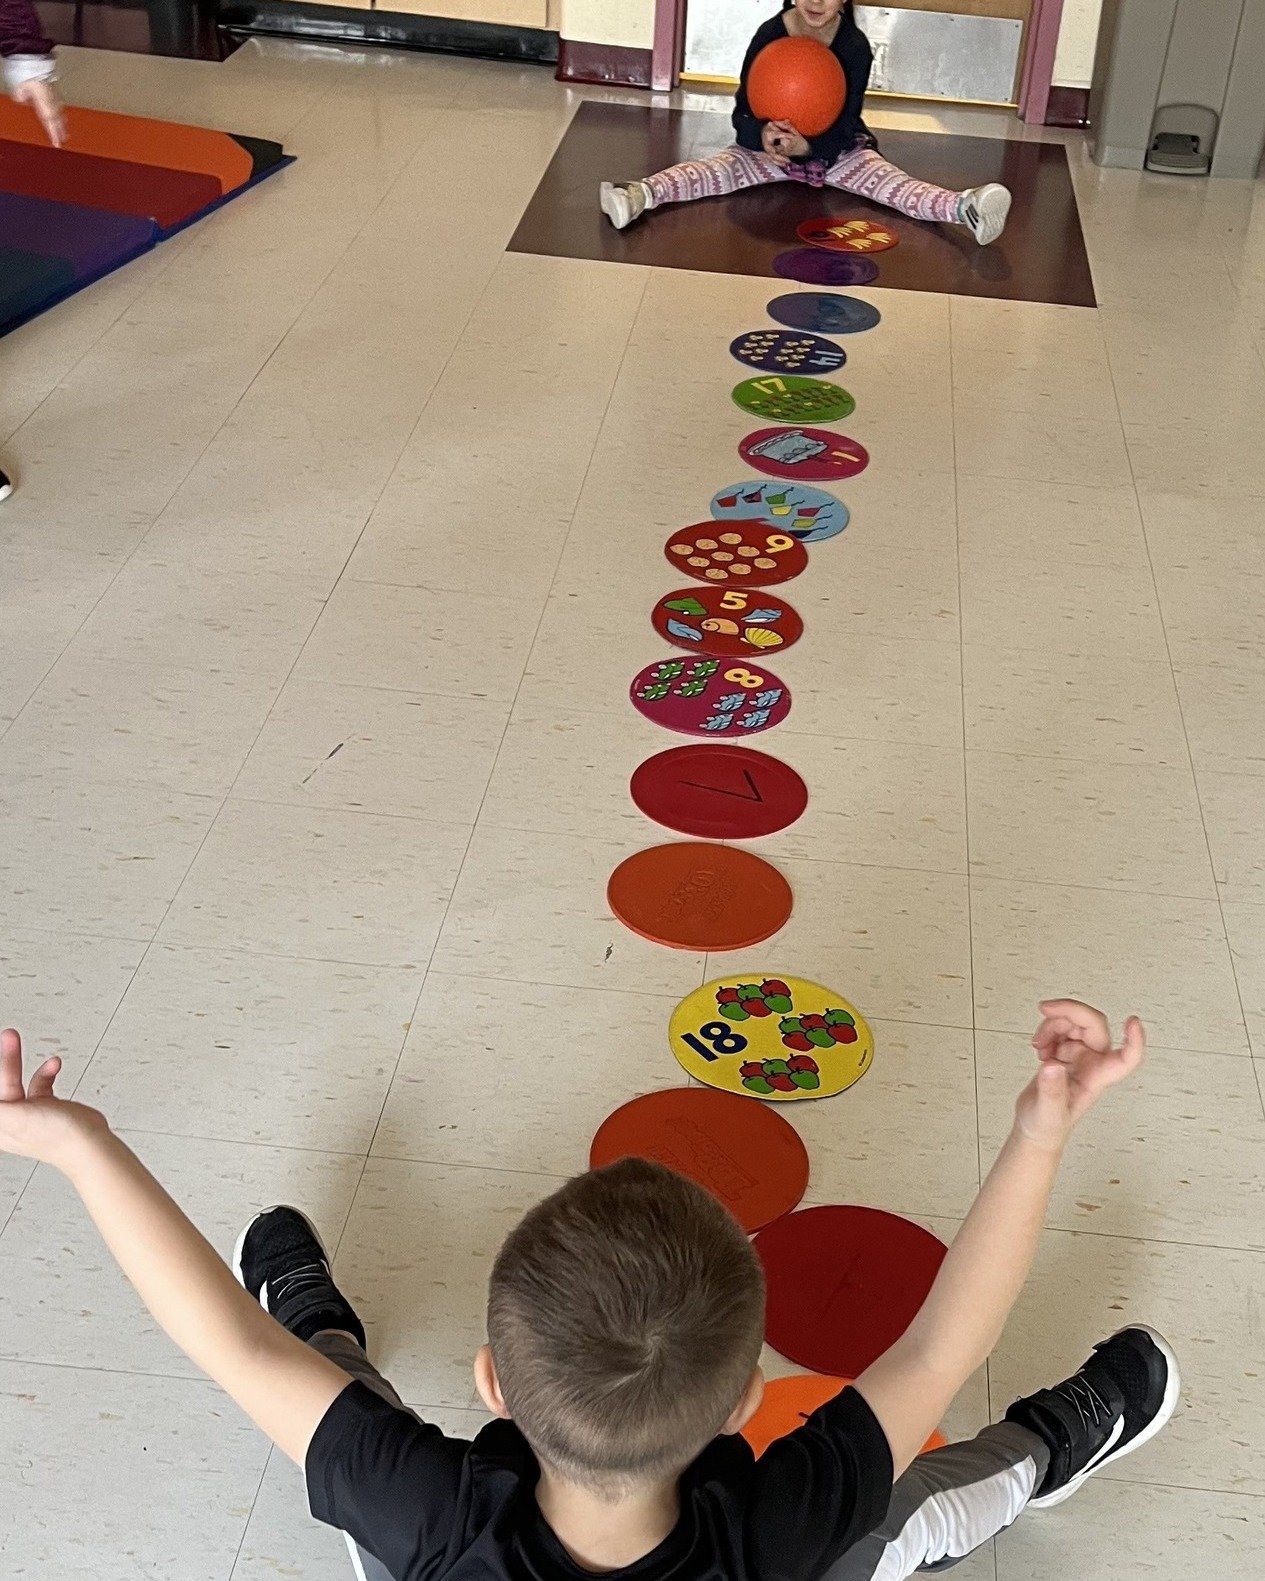 HAPPY FRIYAY!

Our students from our Pathways for Children Salem classrooms have enjoyed a busy start to the spring with an assortment of fun classroom activities! 

#Happyfriyay #pathwaysforchildren #salemma #headstart #preschool